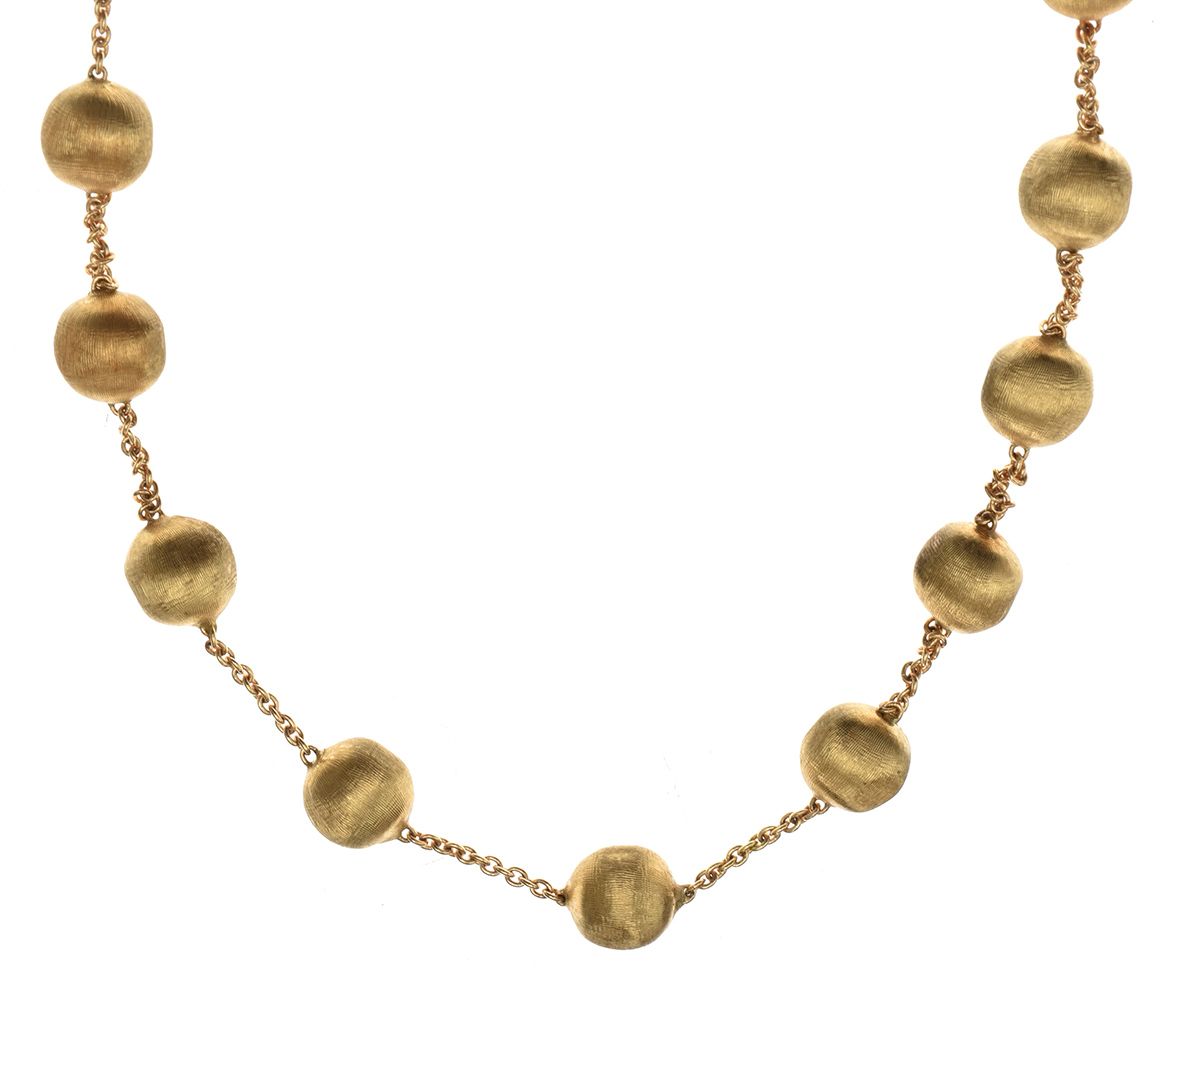 MARCO BICEGO 18CT GOLD NECKLACE